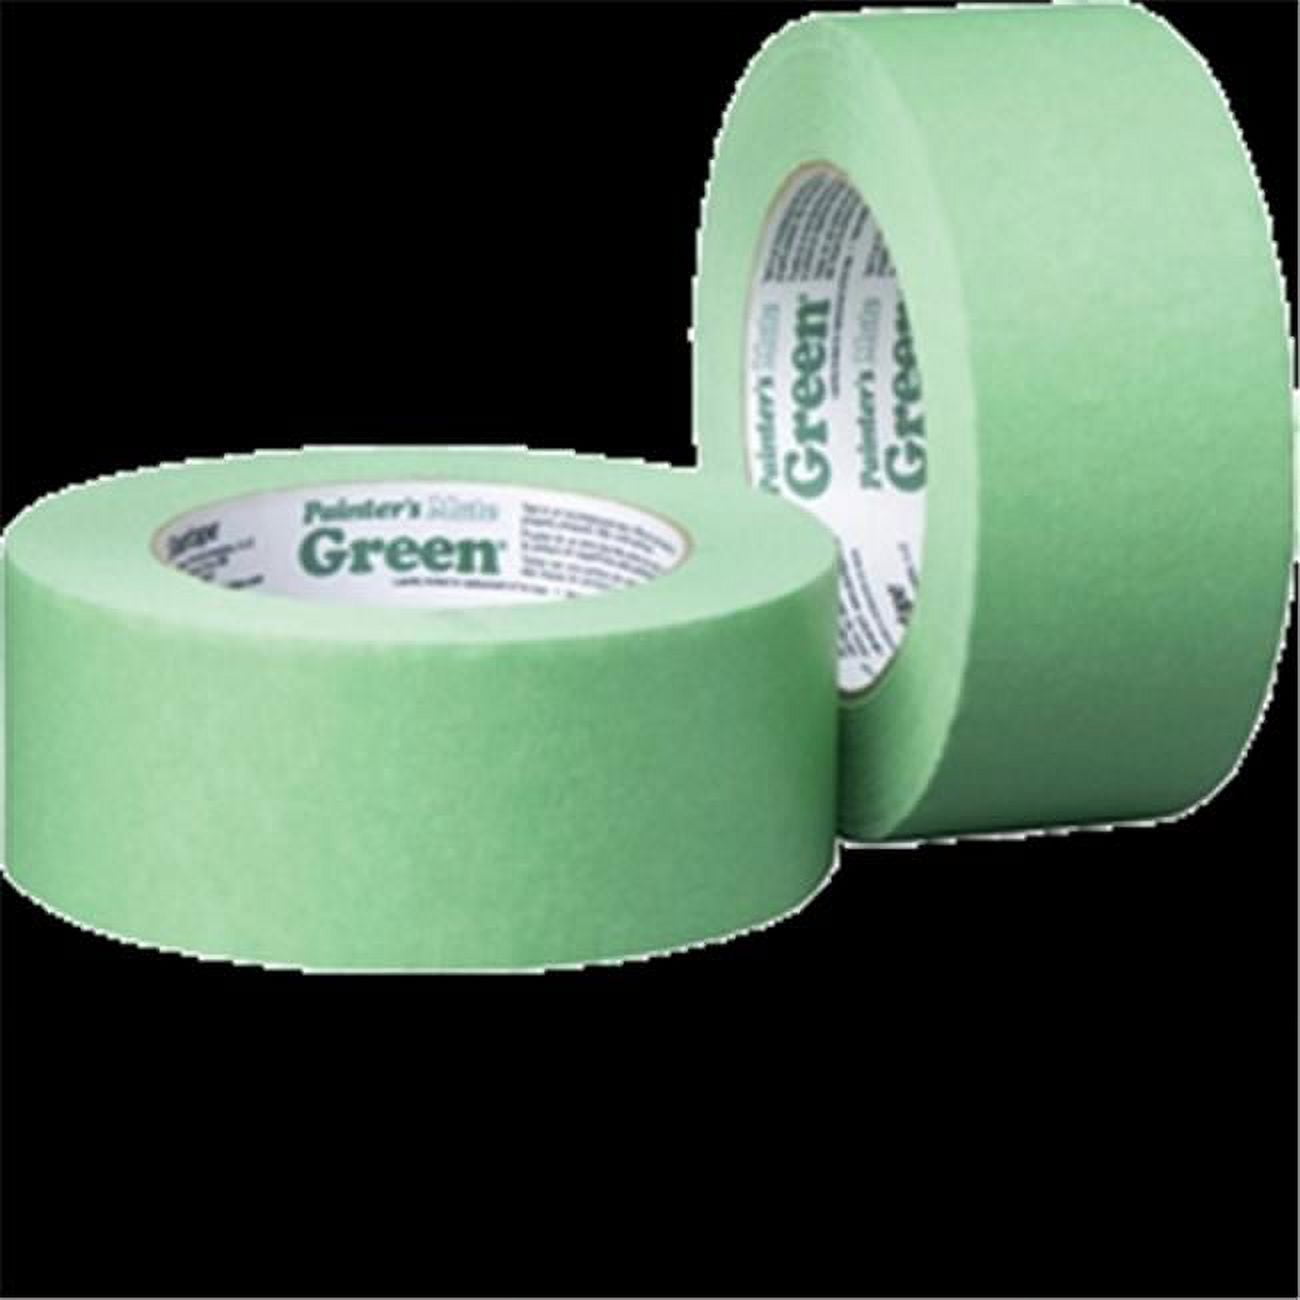 Tape Specialties 15006 1/4-Inch x 60-Yard Painters Mate Green Masking Tape